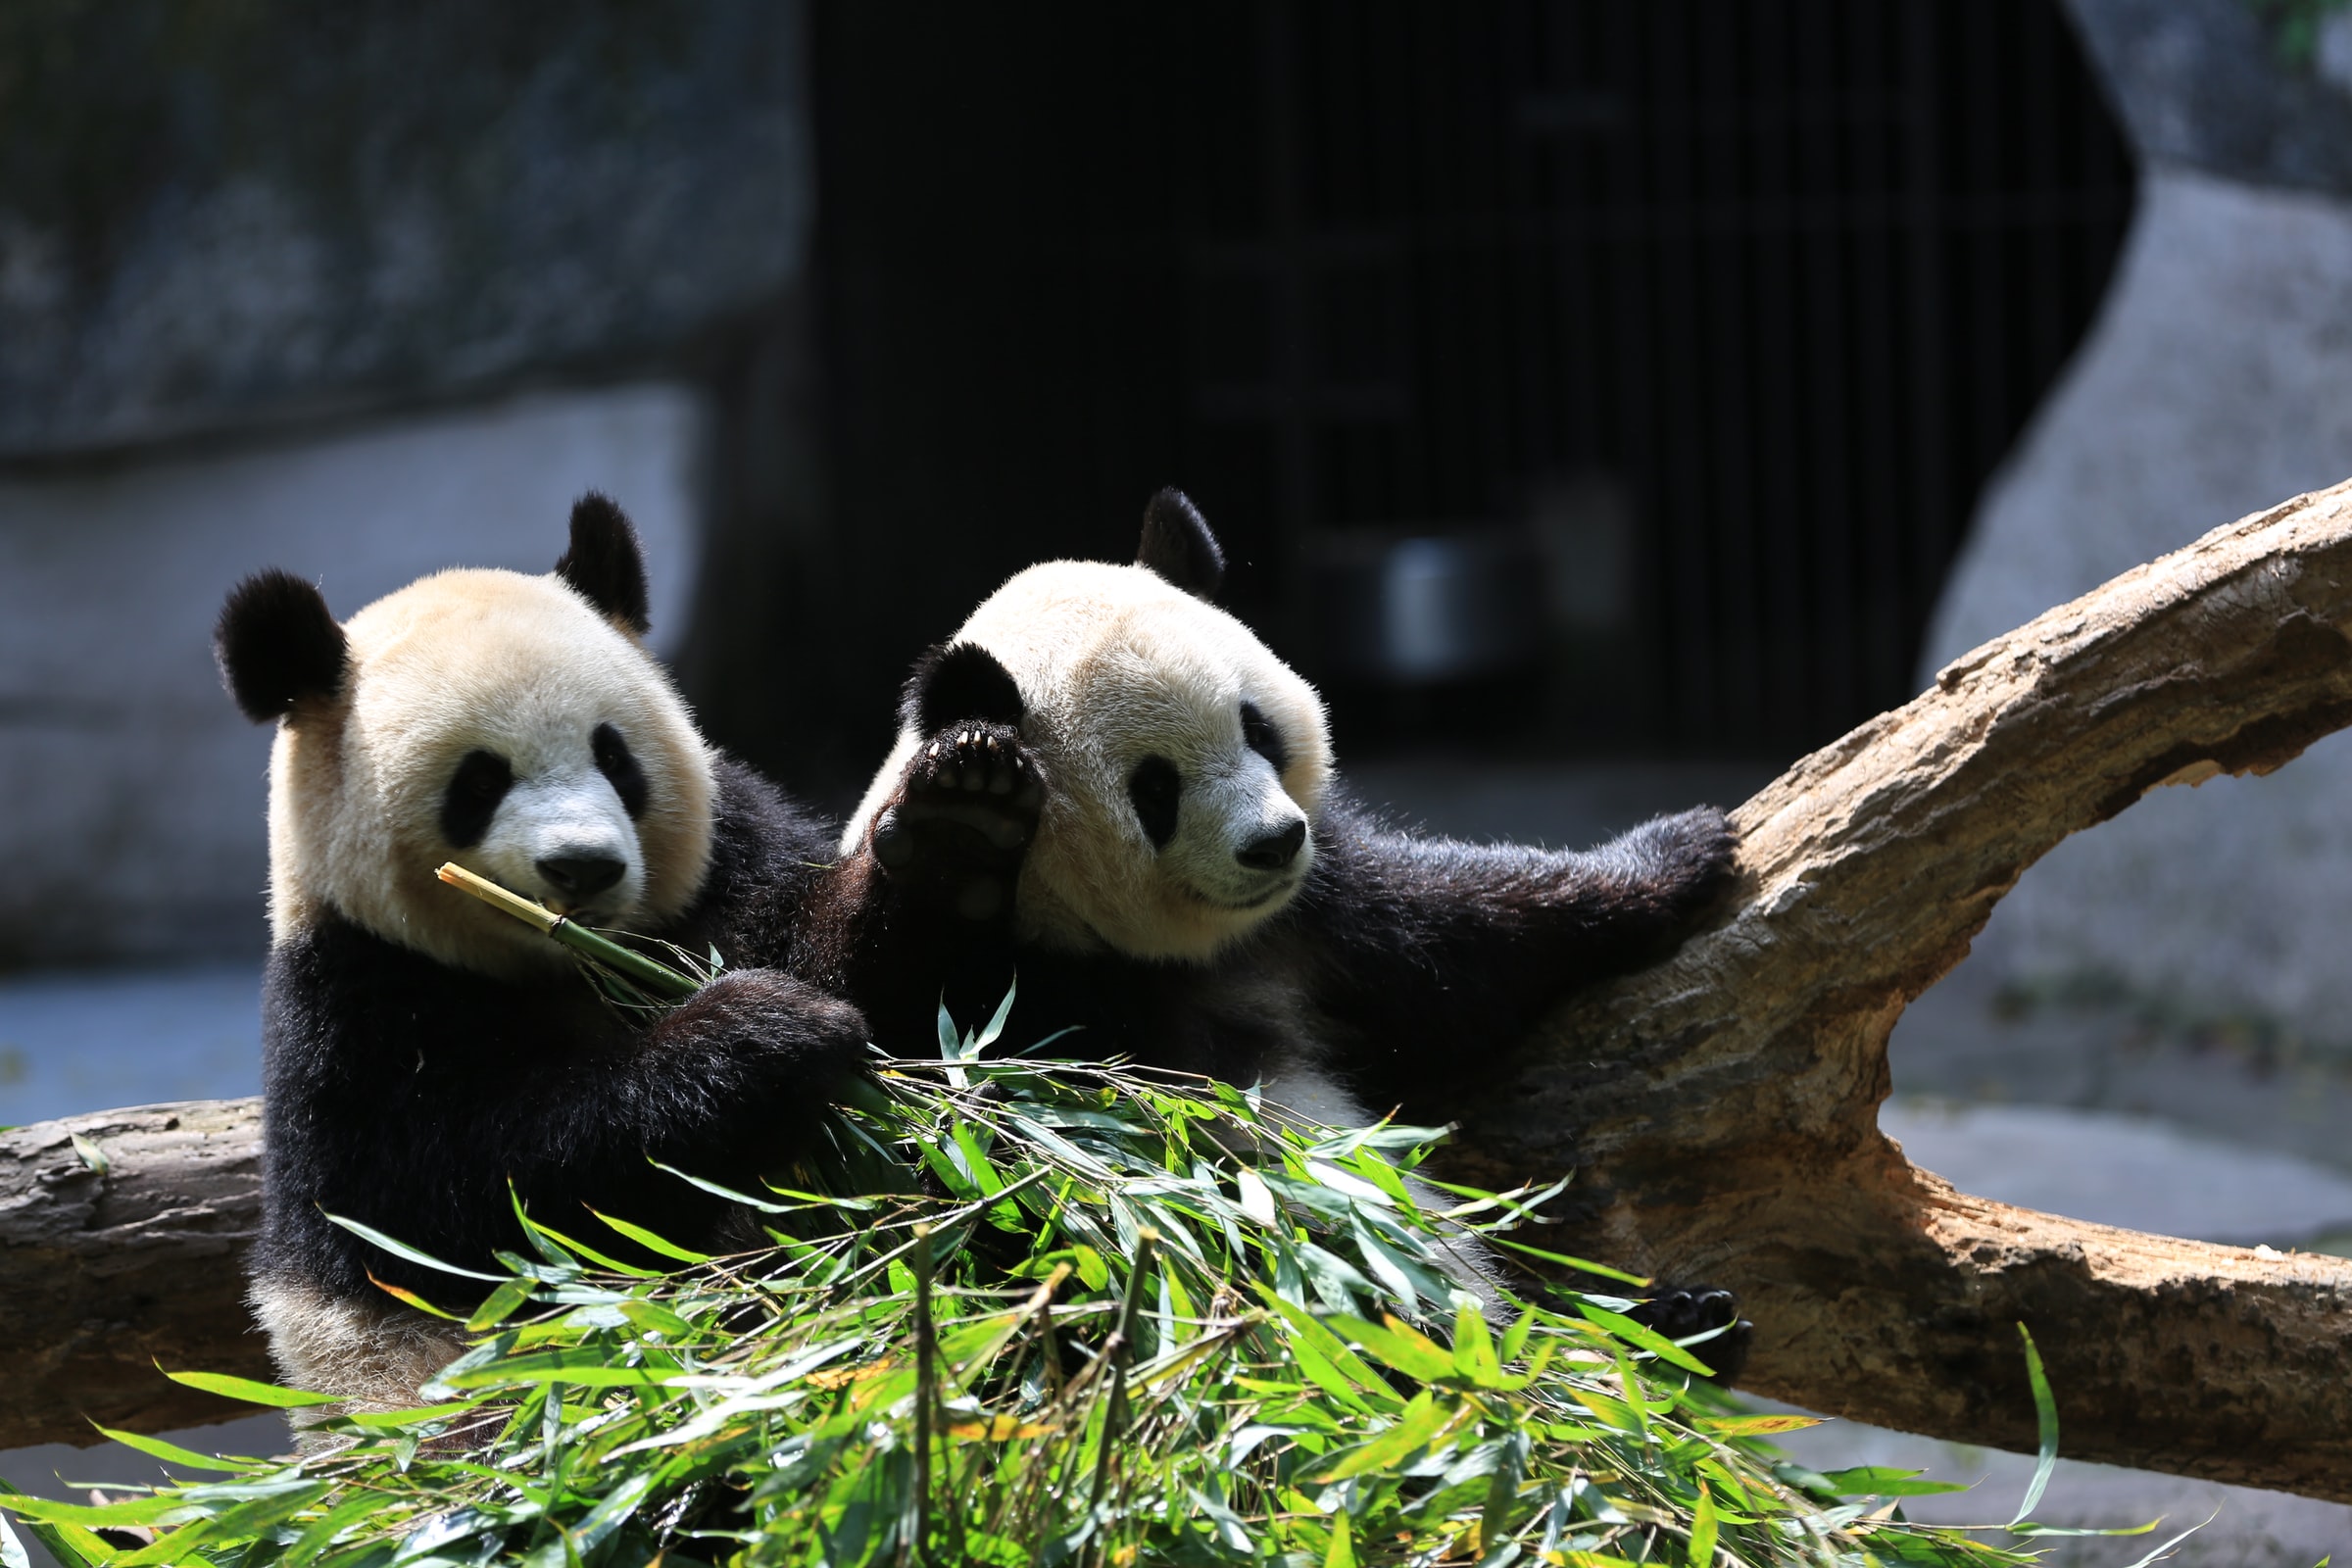 China’s Giant Pandas removed from ‘Endangered’ list